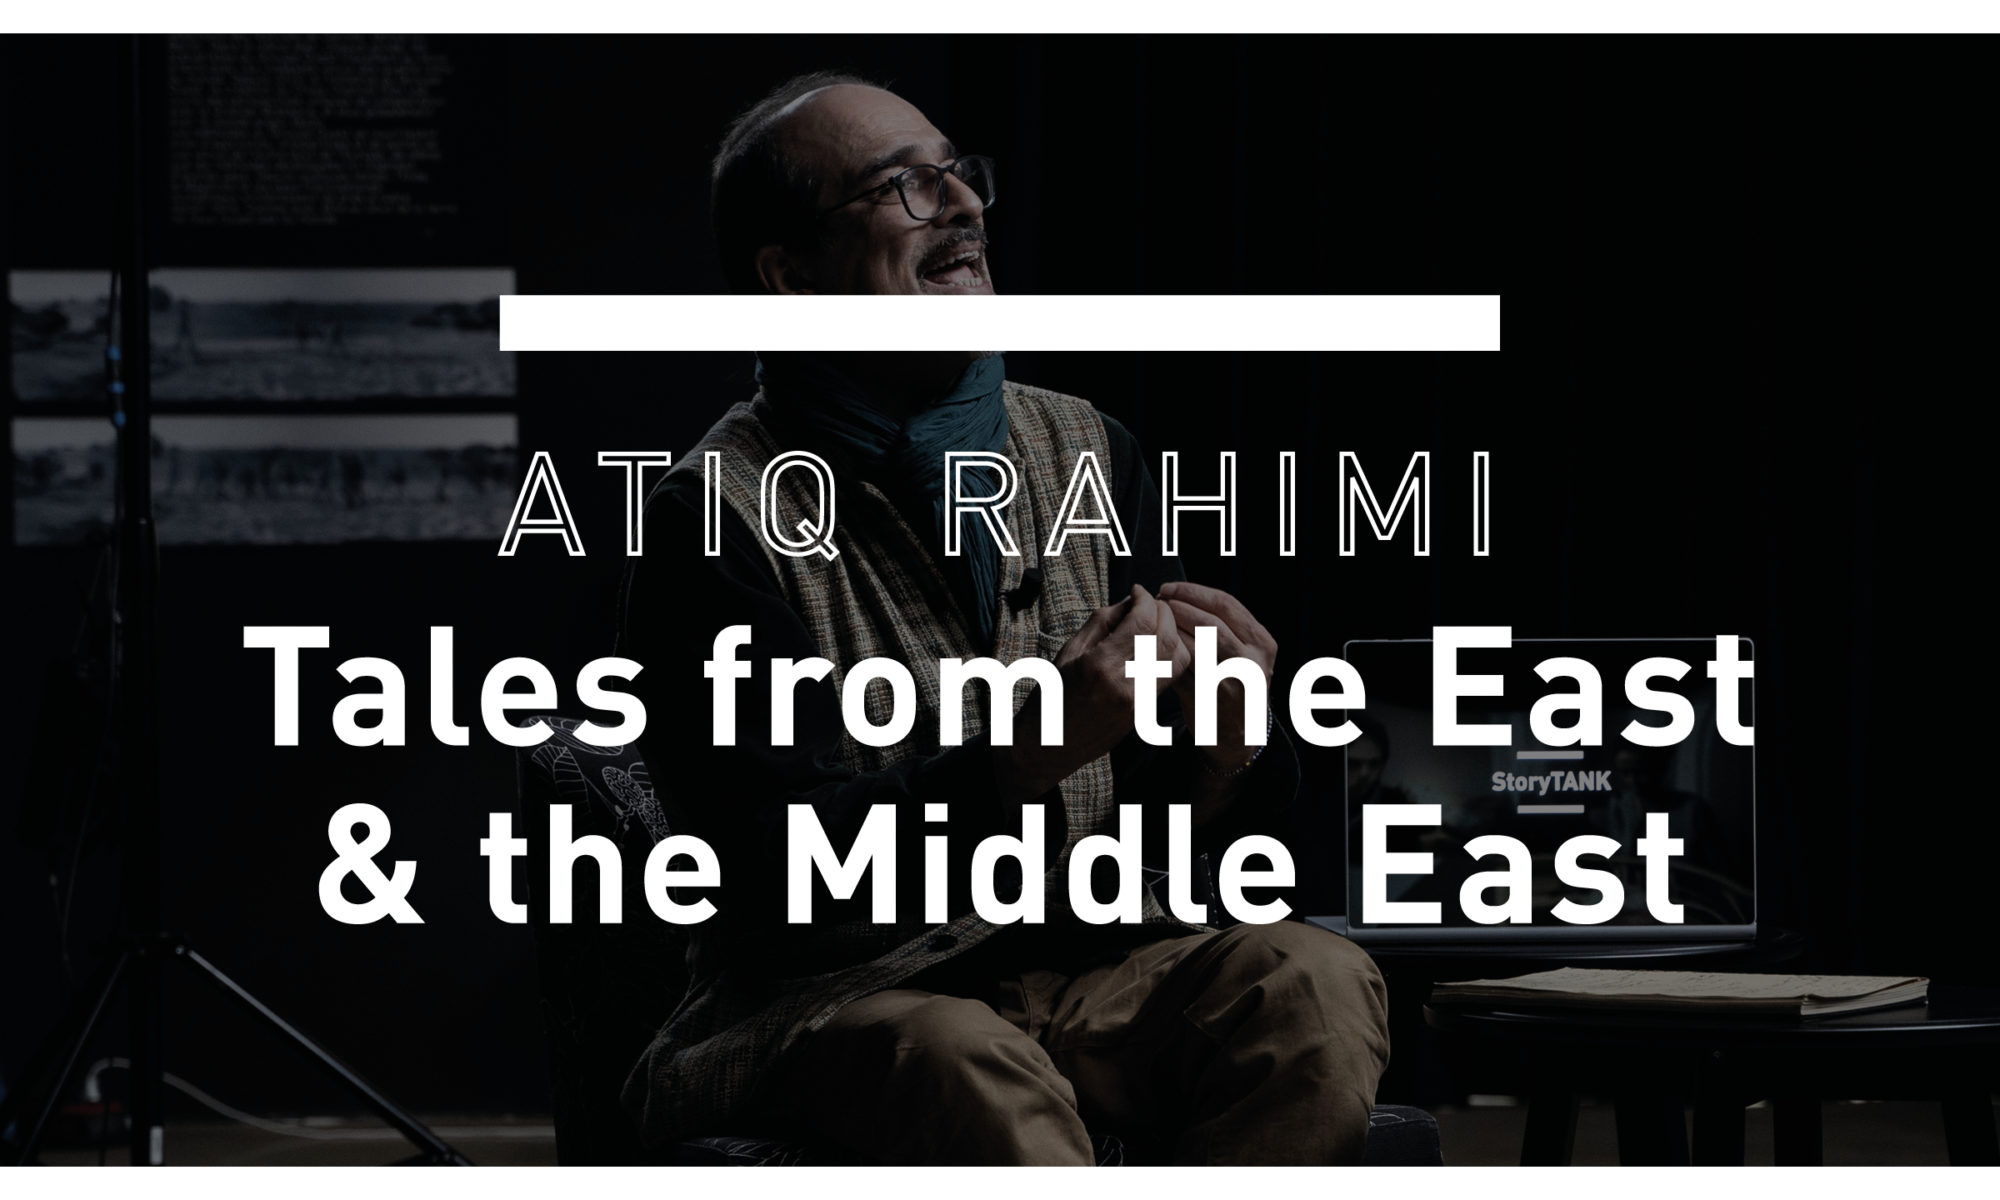 Tales from the East & the Middle East, by Atiq Rahimi